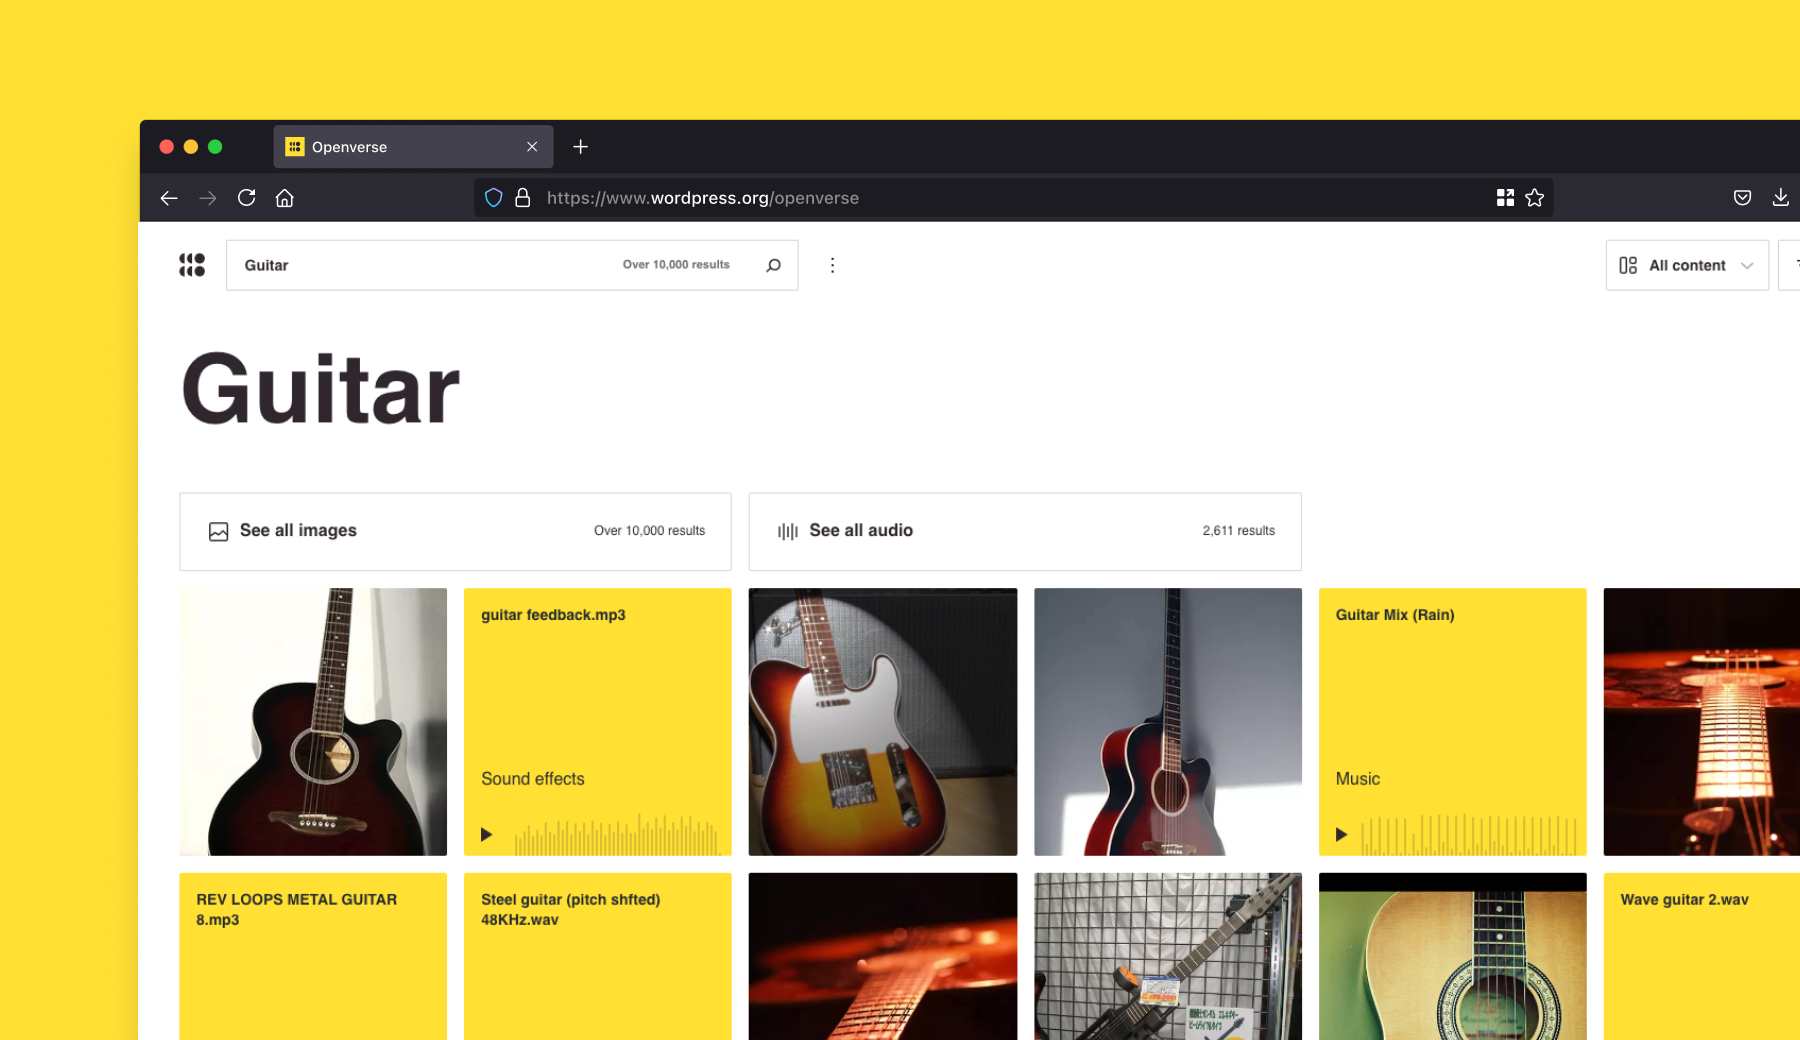 View of search results for "Guitar" in Openverse.